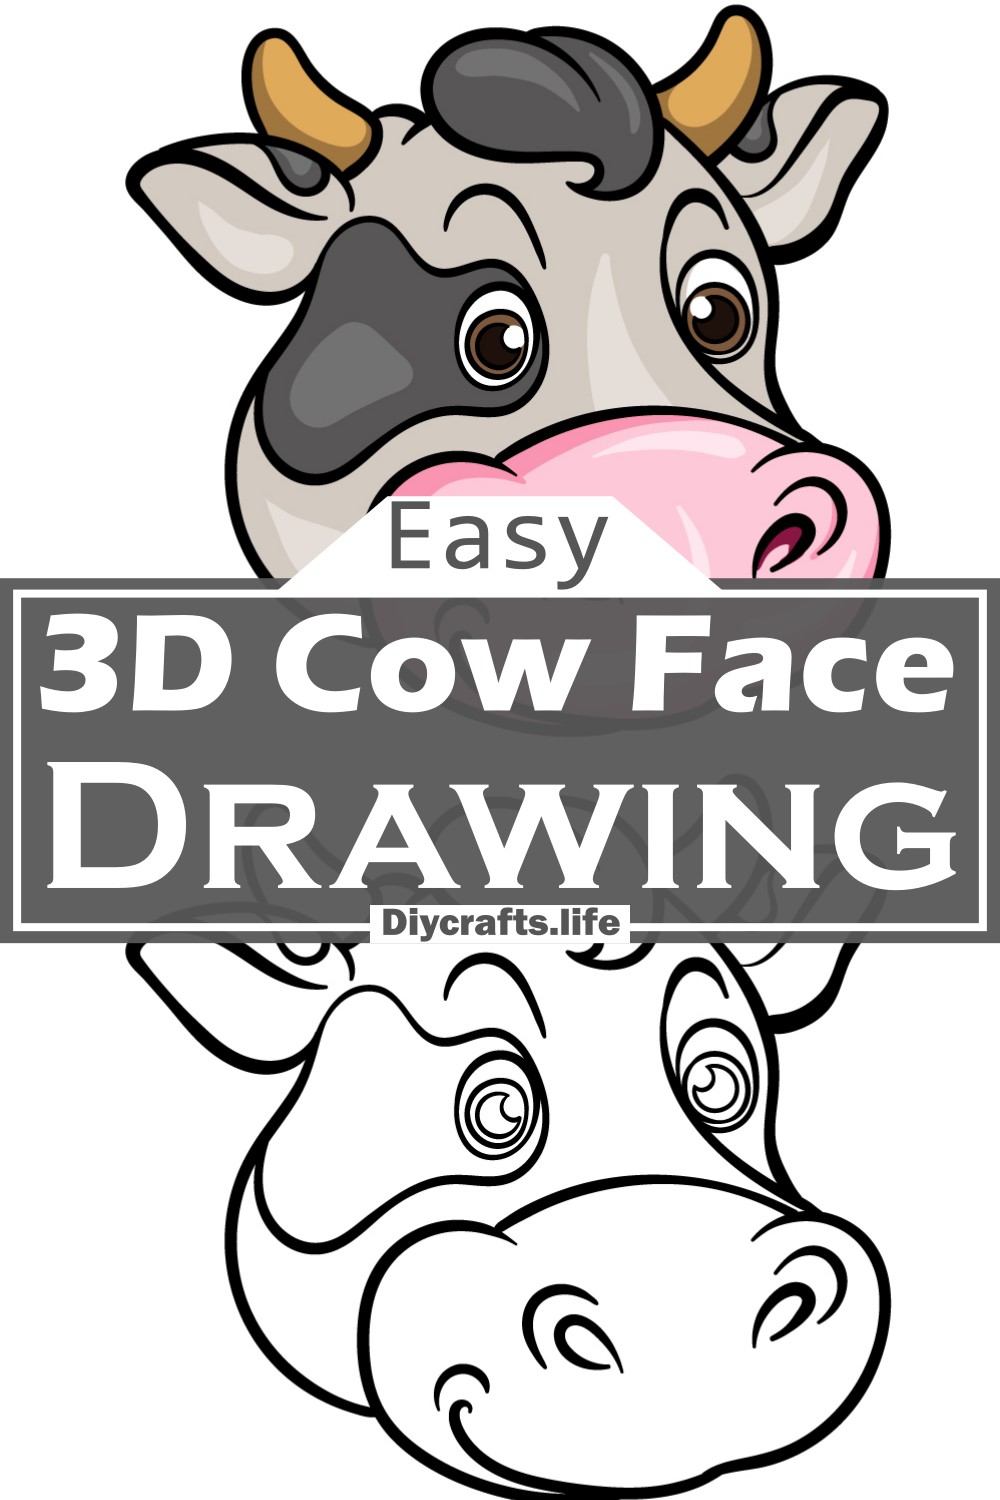 3D Cow Face Drawing